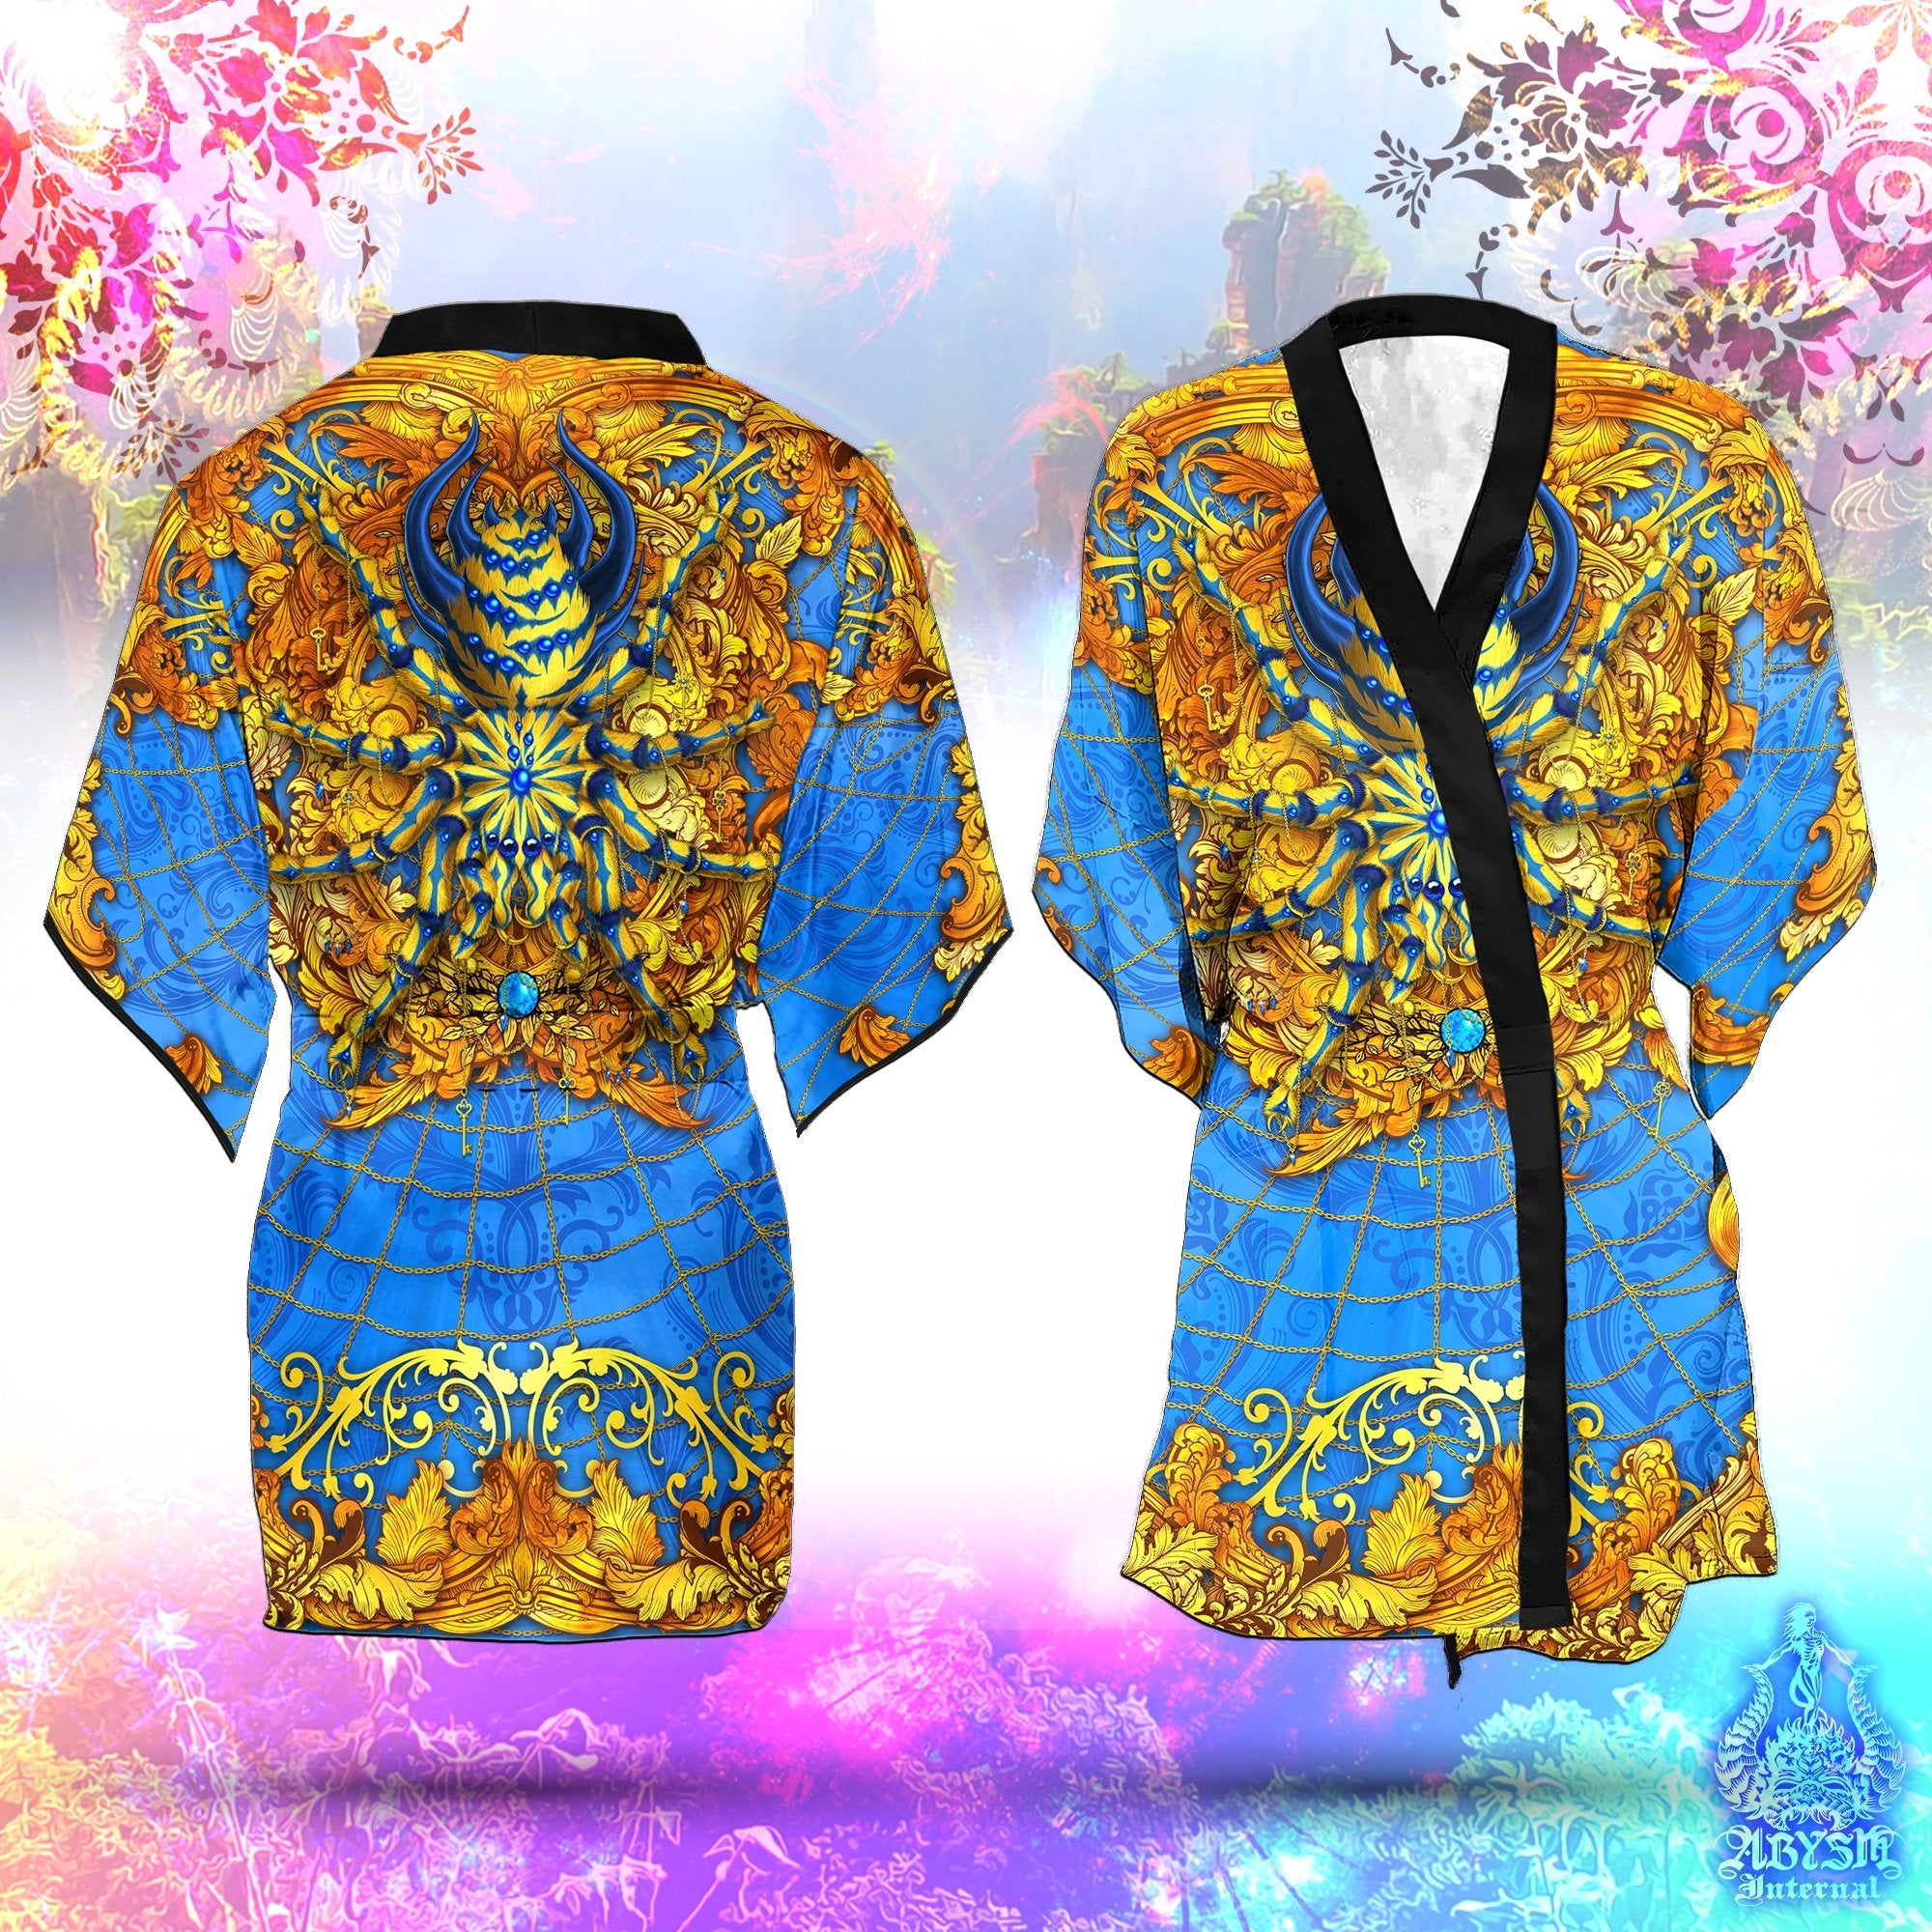 Spider Cover Up, Beach Outfit, Party Kimono, Summer Festival Robe, Indie and Alternative Clothing, Unisex - Tarantula, Cyan and Gold - Abysm Internal